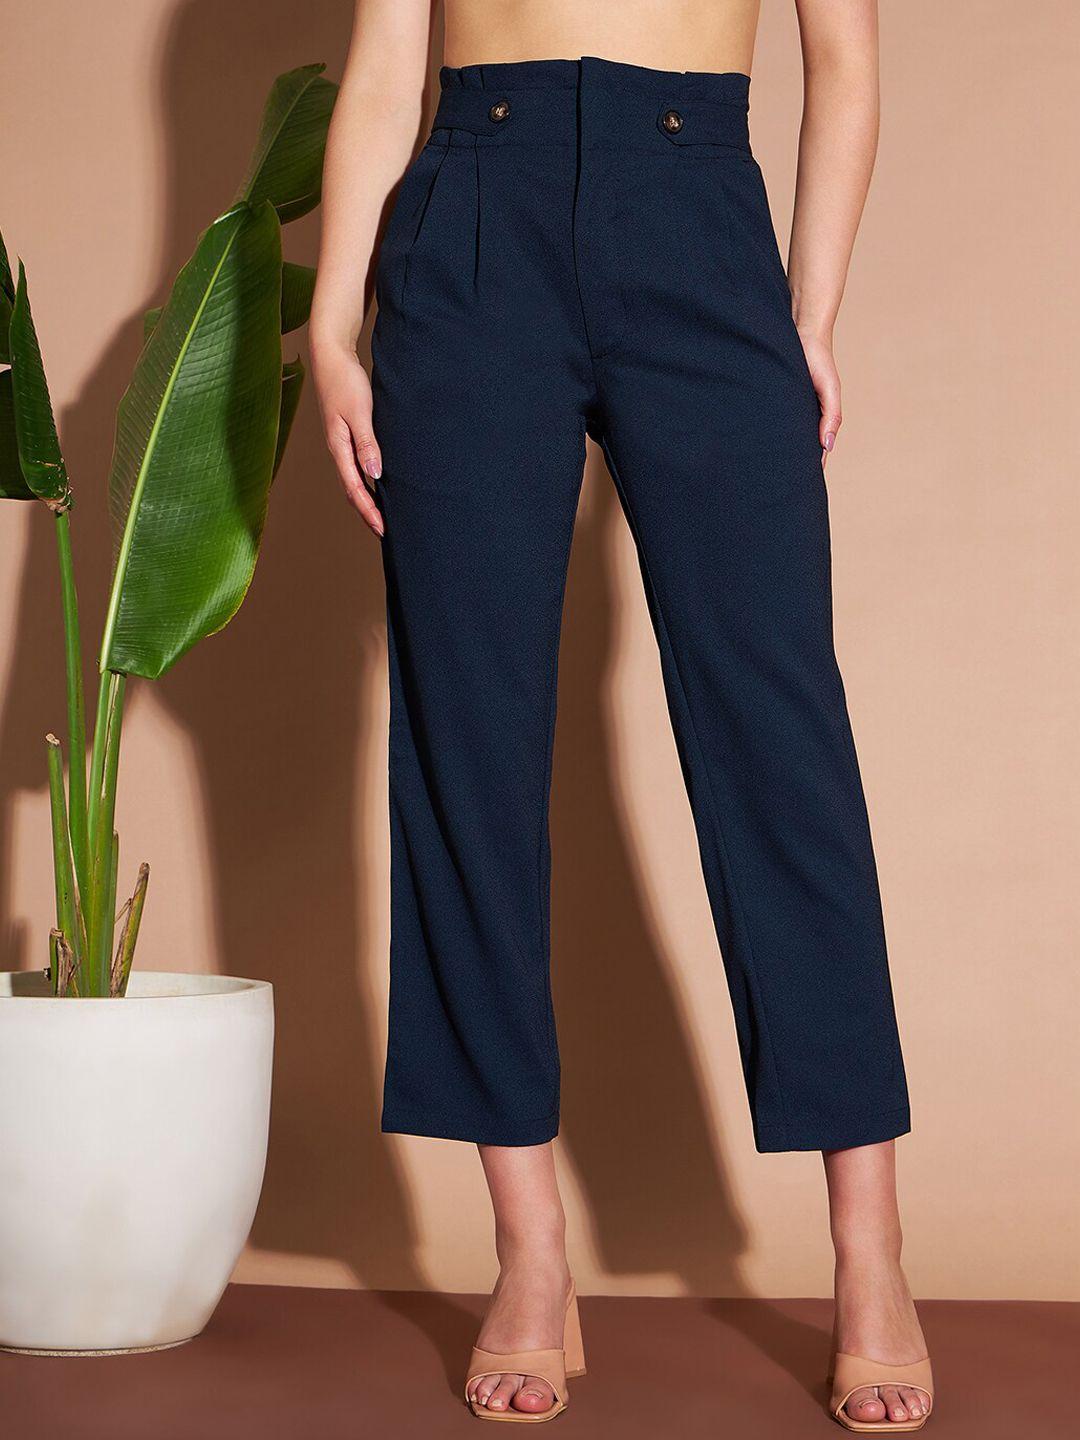 marie claire women blue high-rise plain pleated cropped trousers